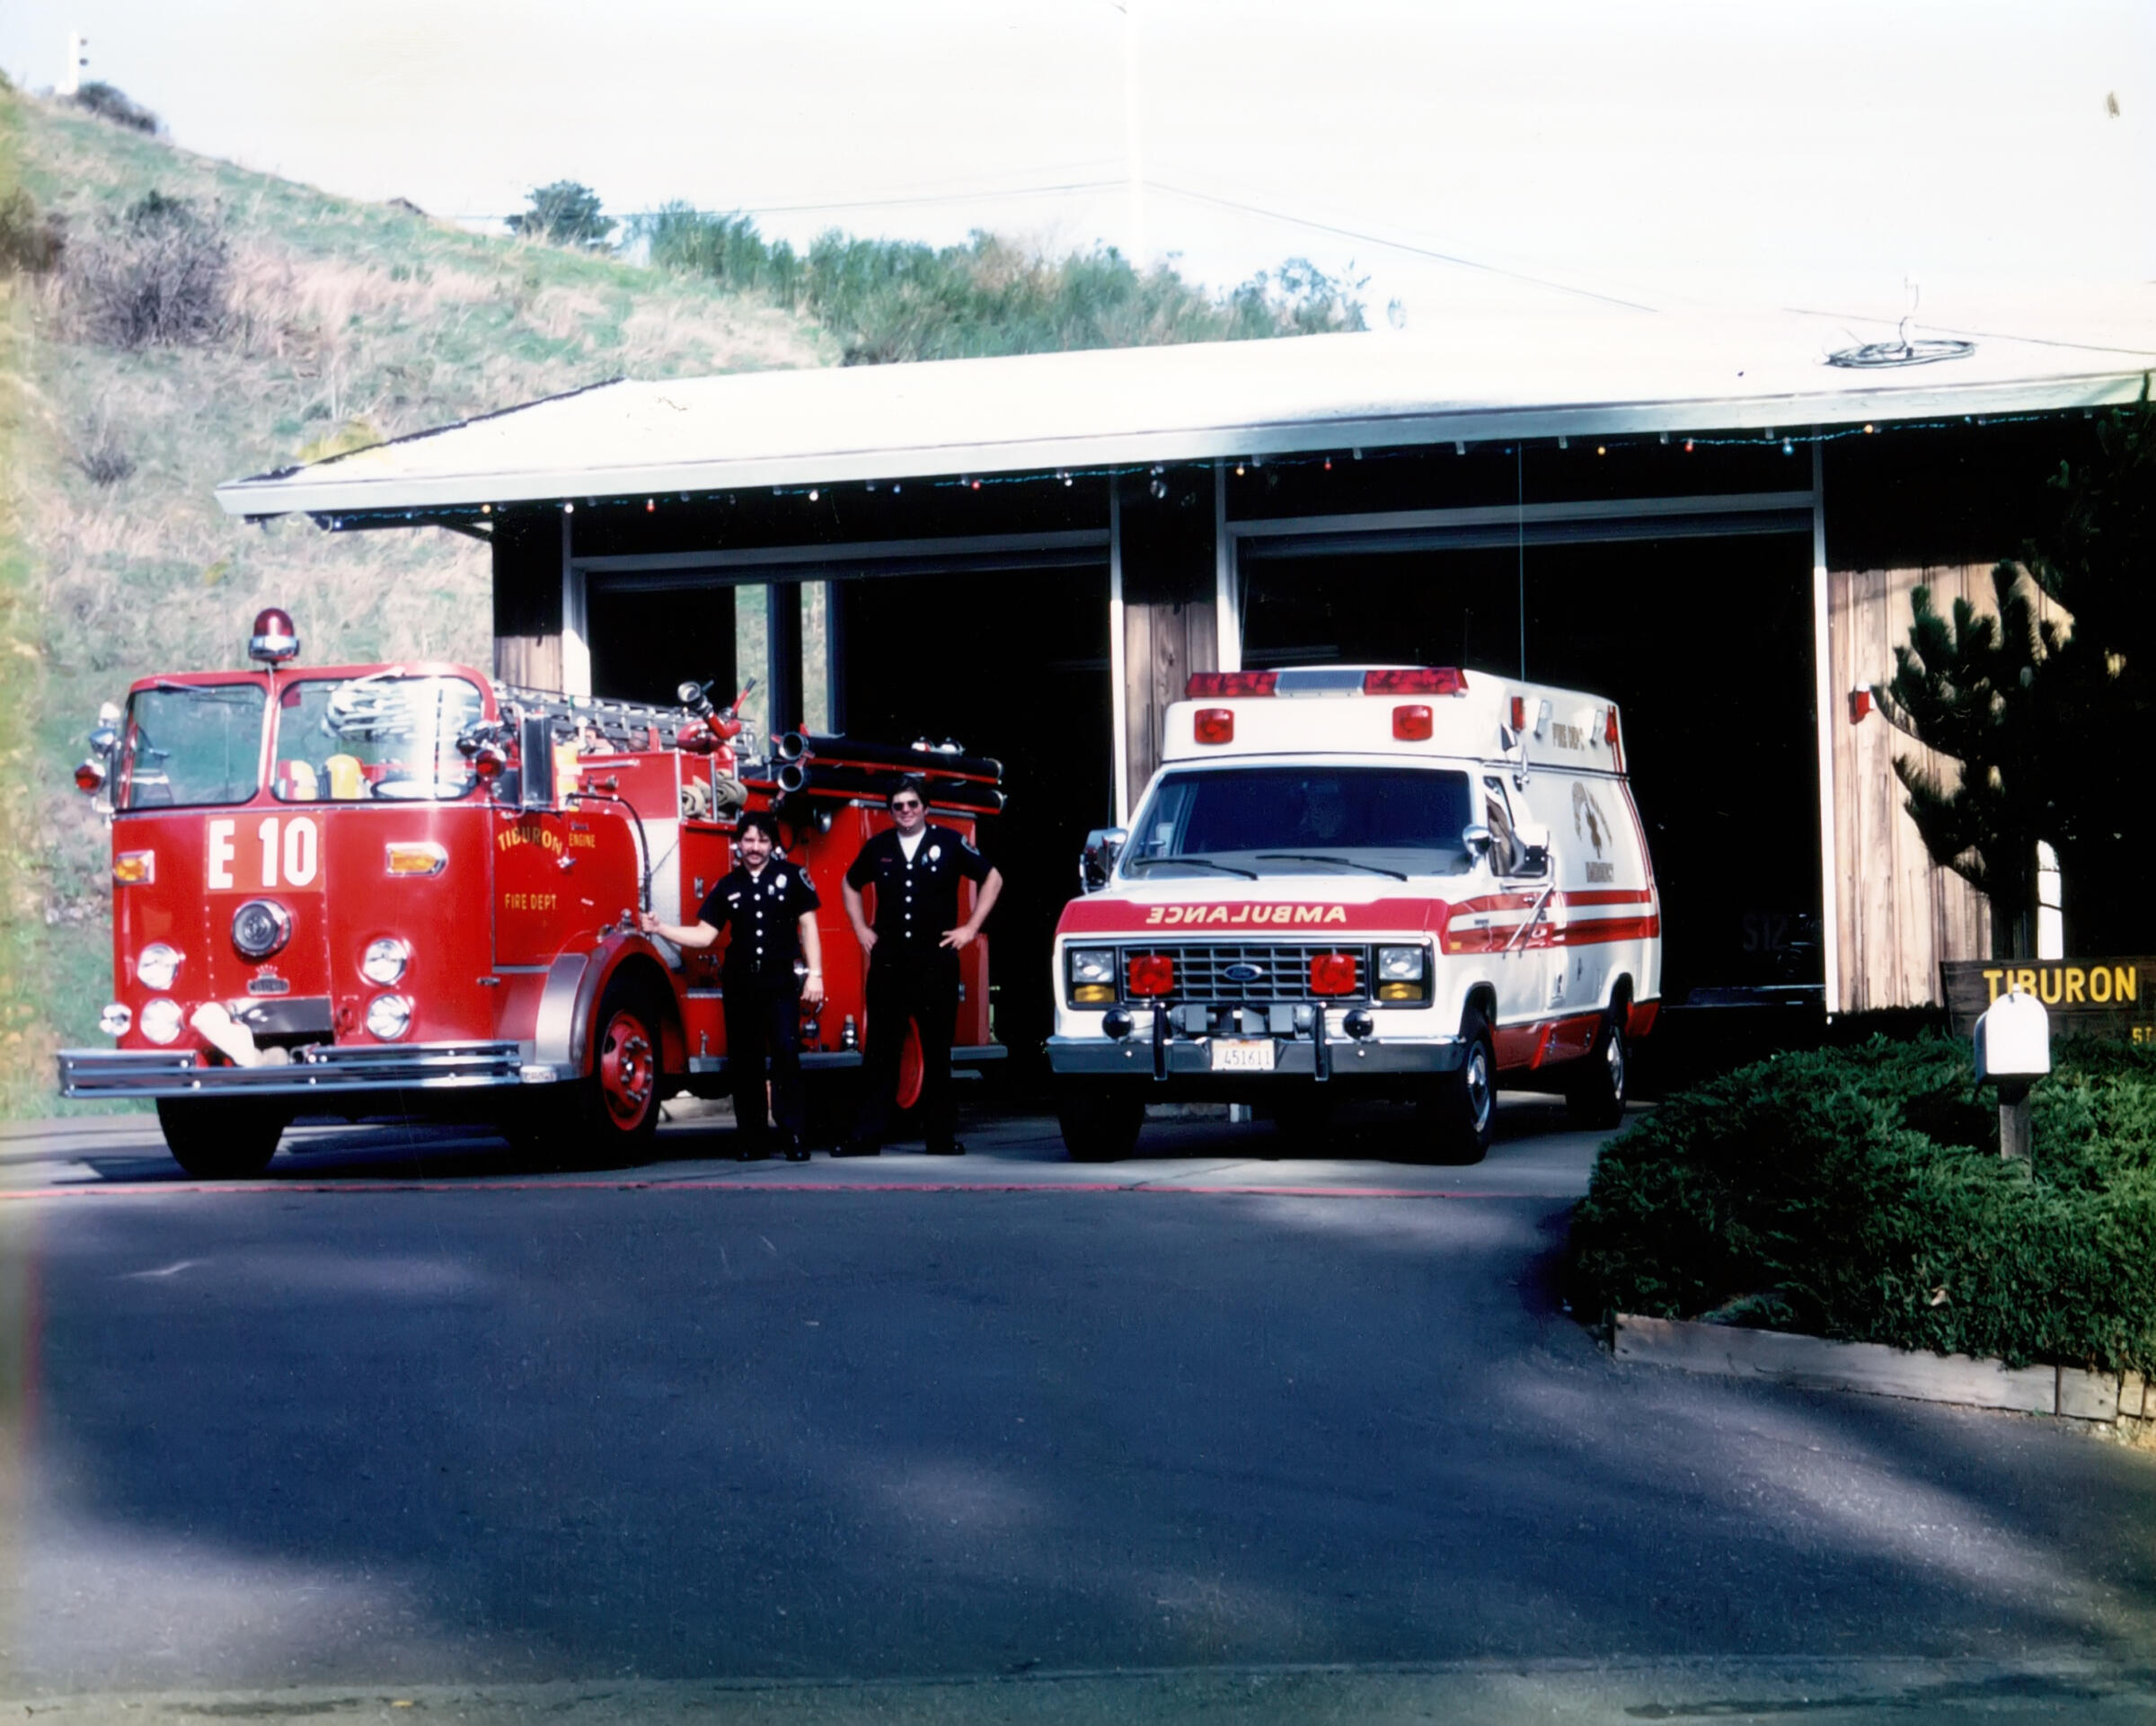 Station 10 in the 1980s